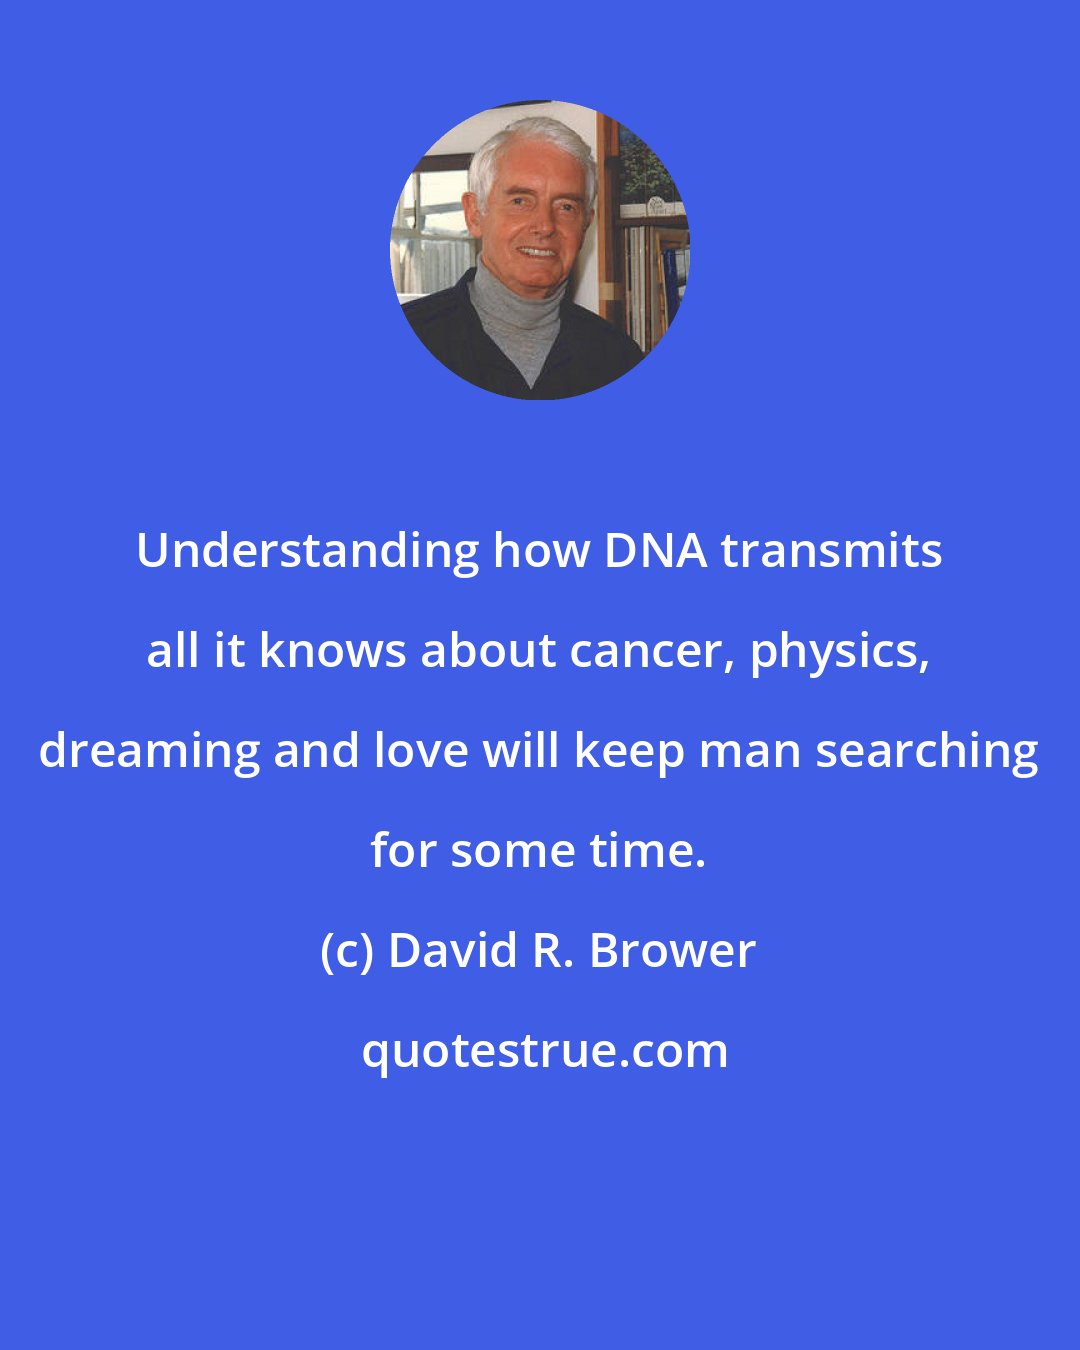 David R. Brower: Understanding how DNA transmits all it knows about cancer, physics, dreaming and love will keep man searching for some time.